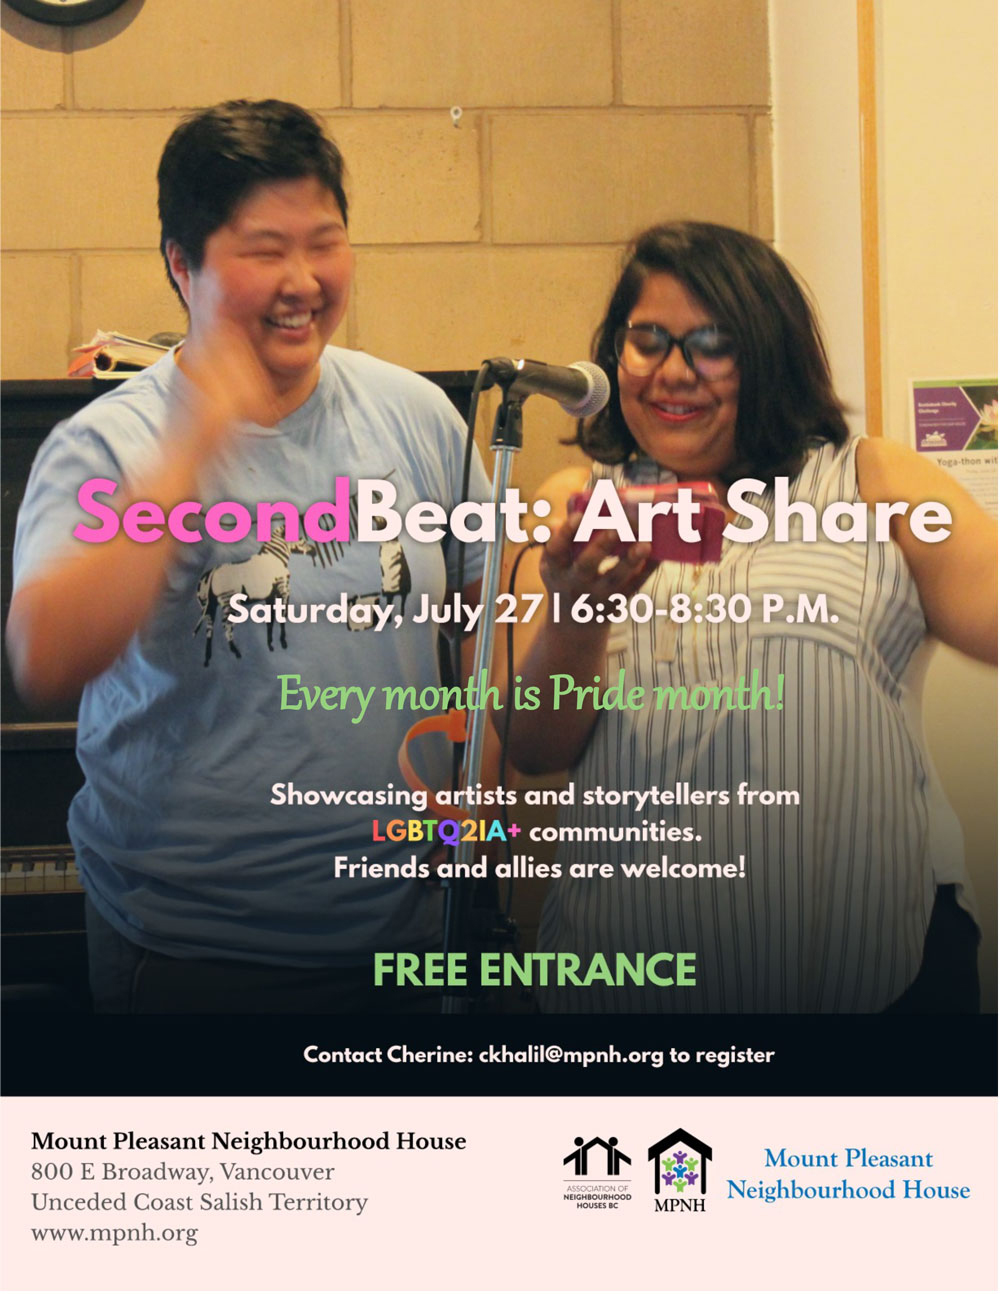 A poster with event details, featuring a photo of two performers smiling at the microphone, in front of the piano at Mount Pleasant Neighbourhood House.